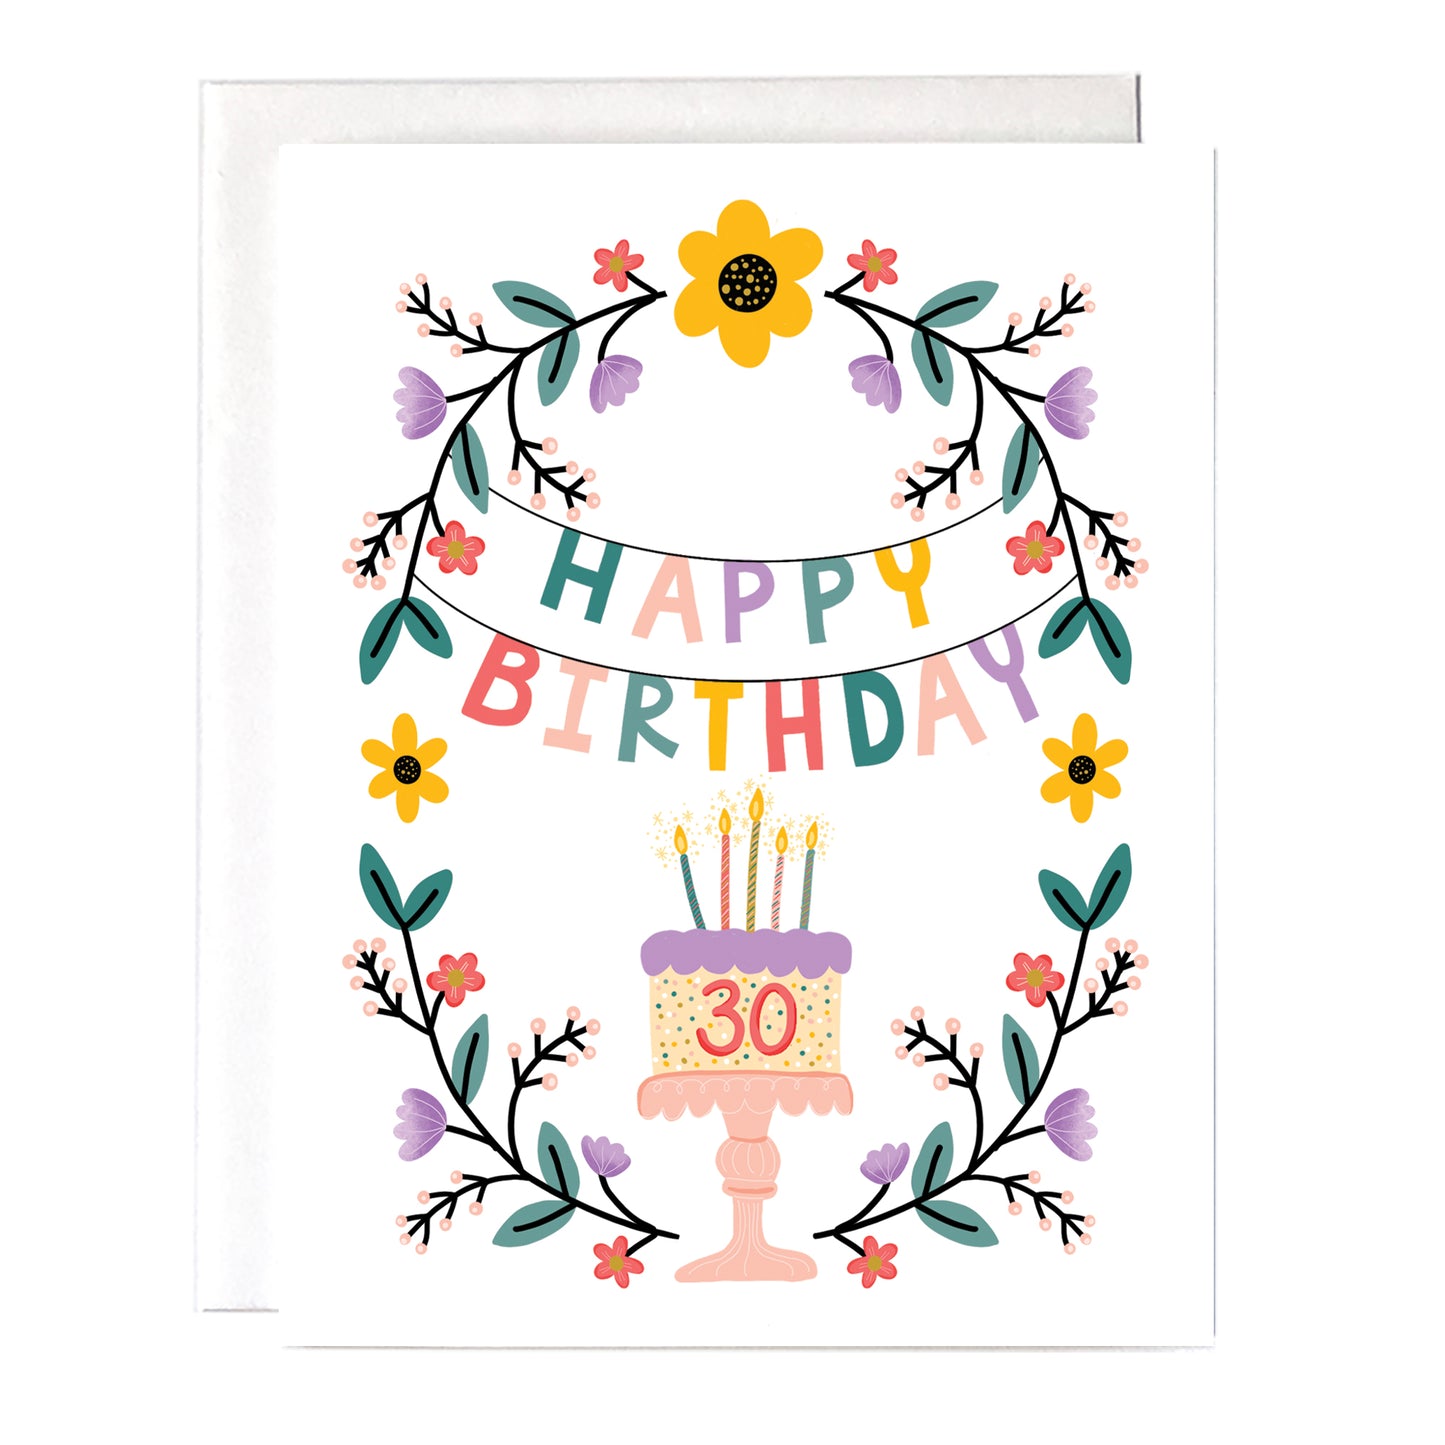 30th Birthday Card with beautiful floral design and birthday cake. Size A2 greeting card (4.25" x 5.5") with envelope, blank Inside. All cards are designed and Illustrated with love by me, Anna Fox, and are printed at my friendly neighborhood print shop in Denver, CO.